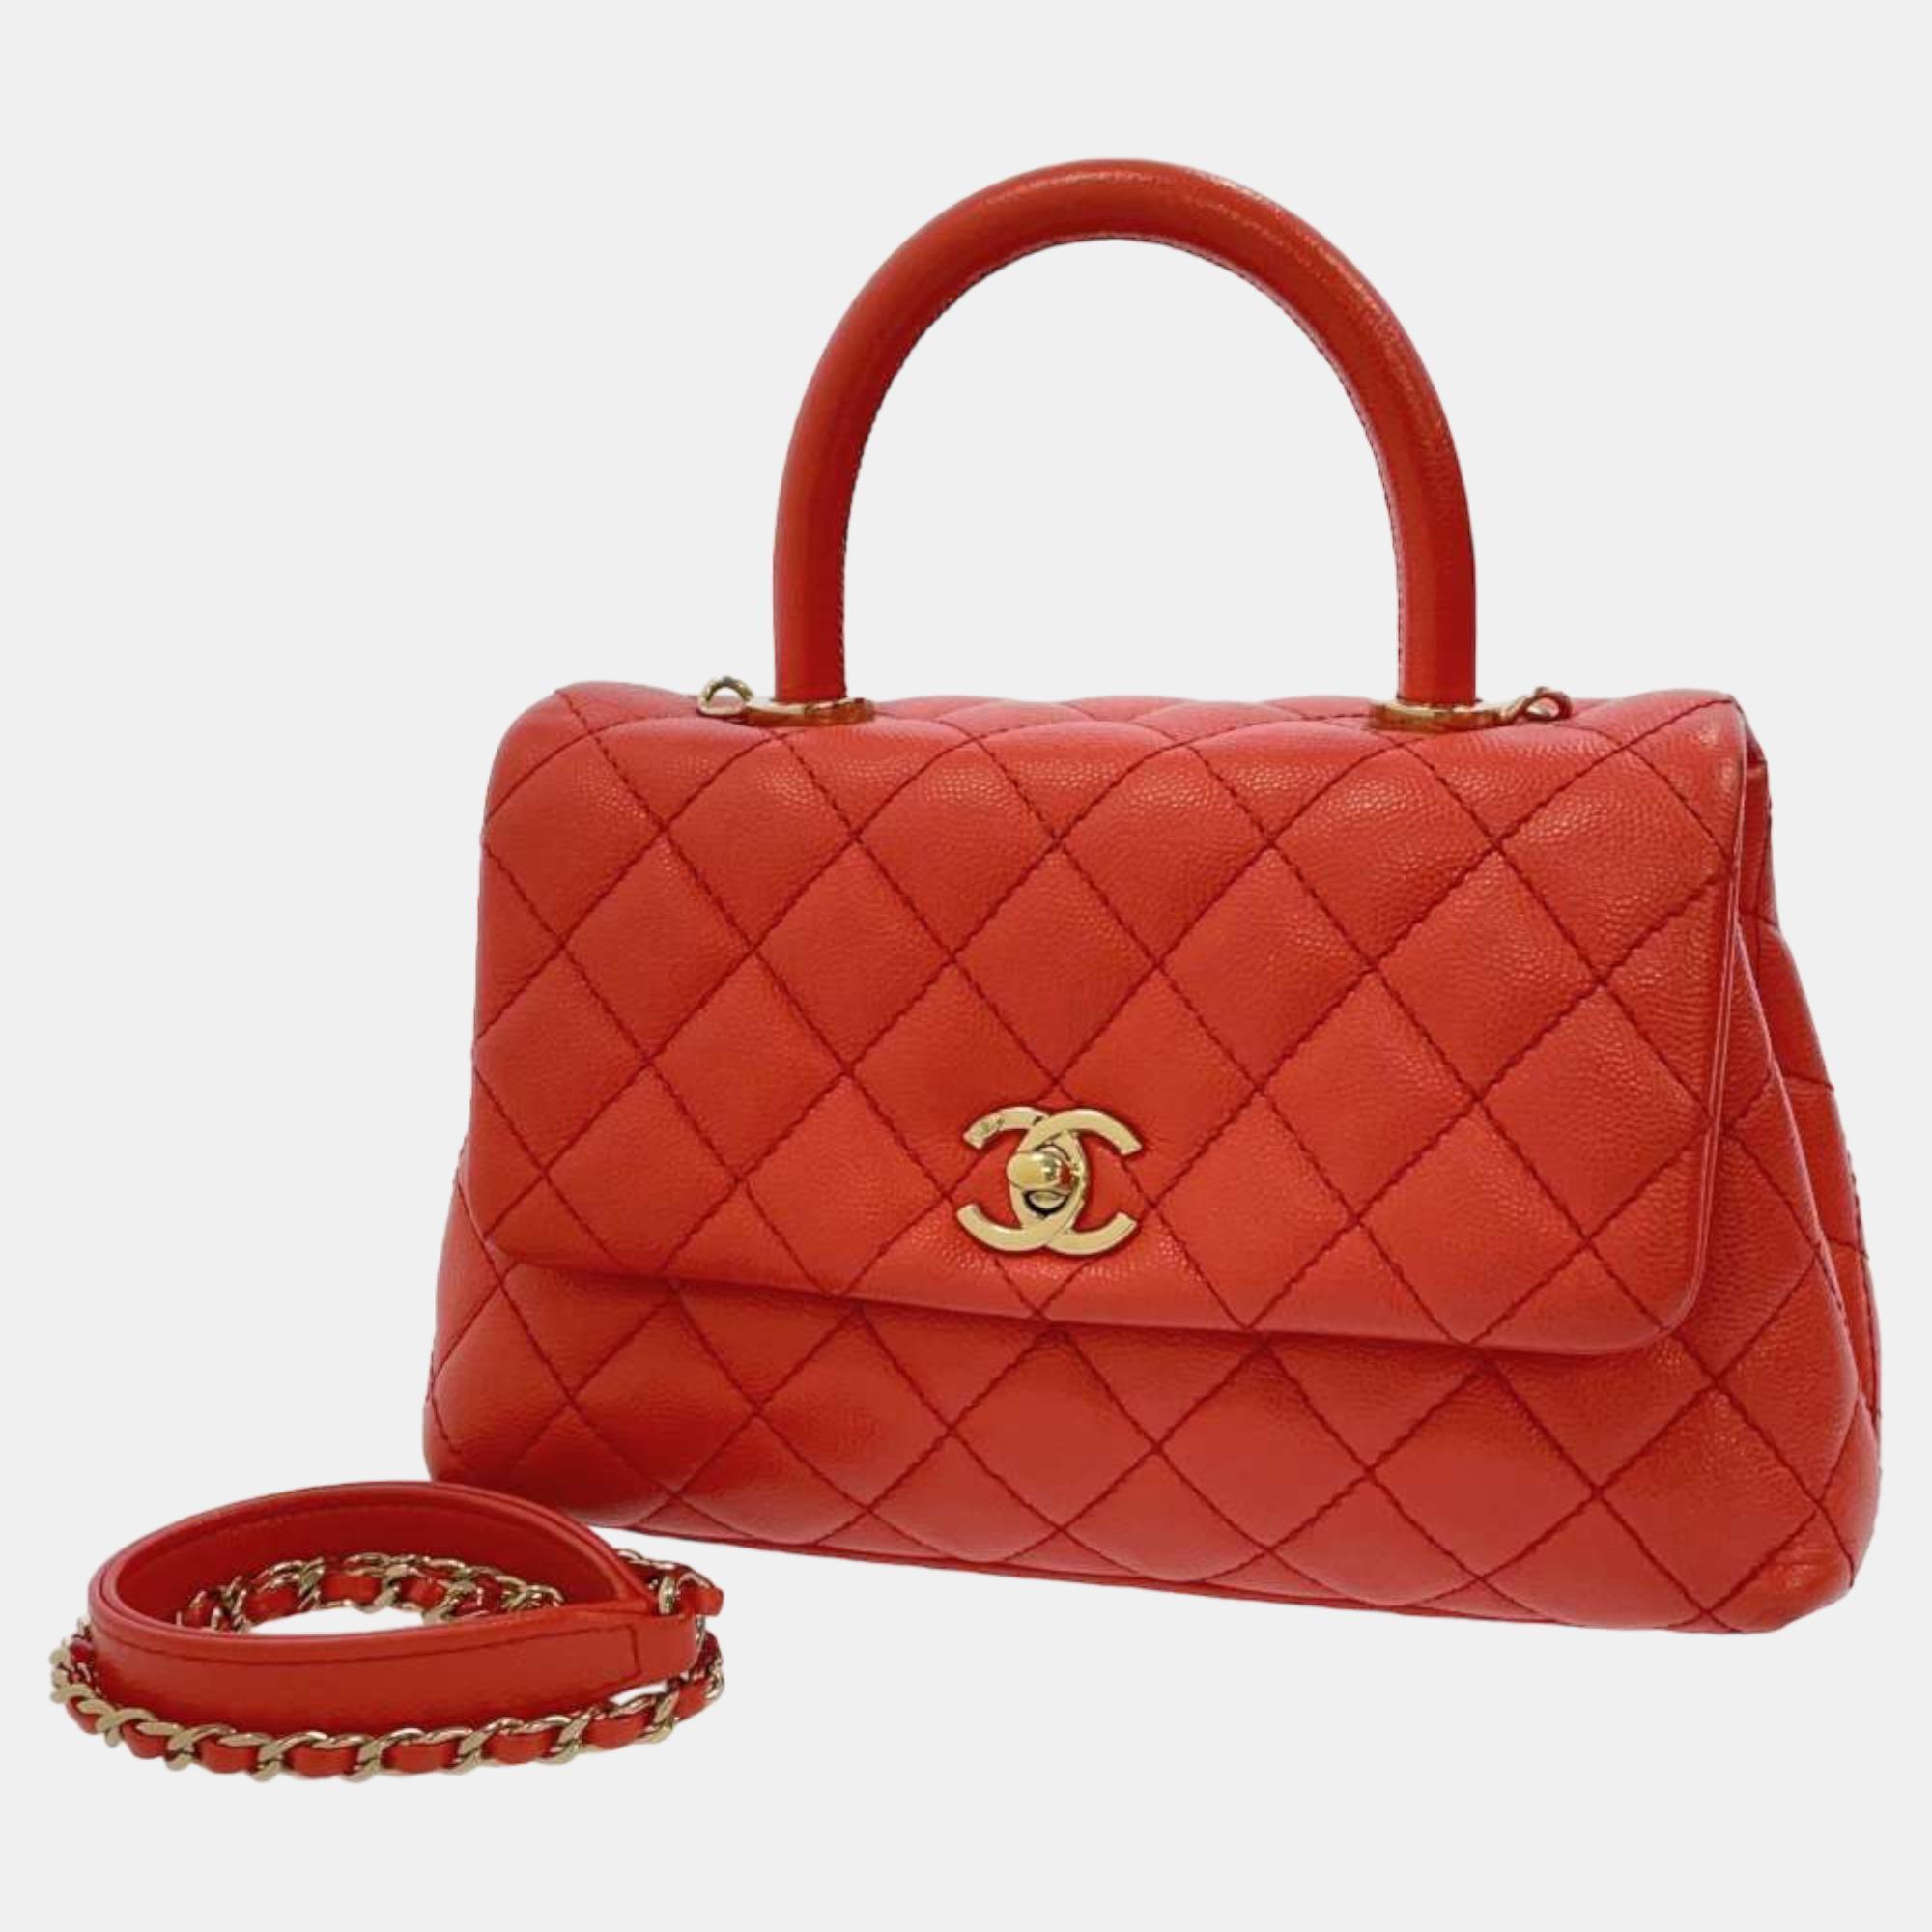 Chanel Red Caviar Leather Coco Top Handle Bag